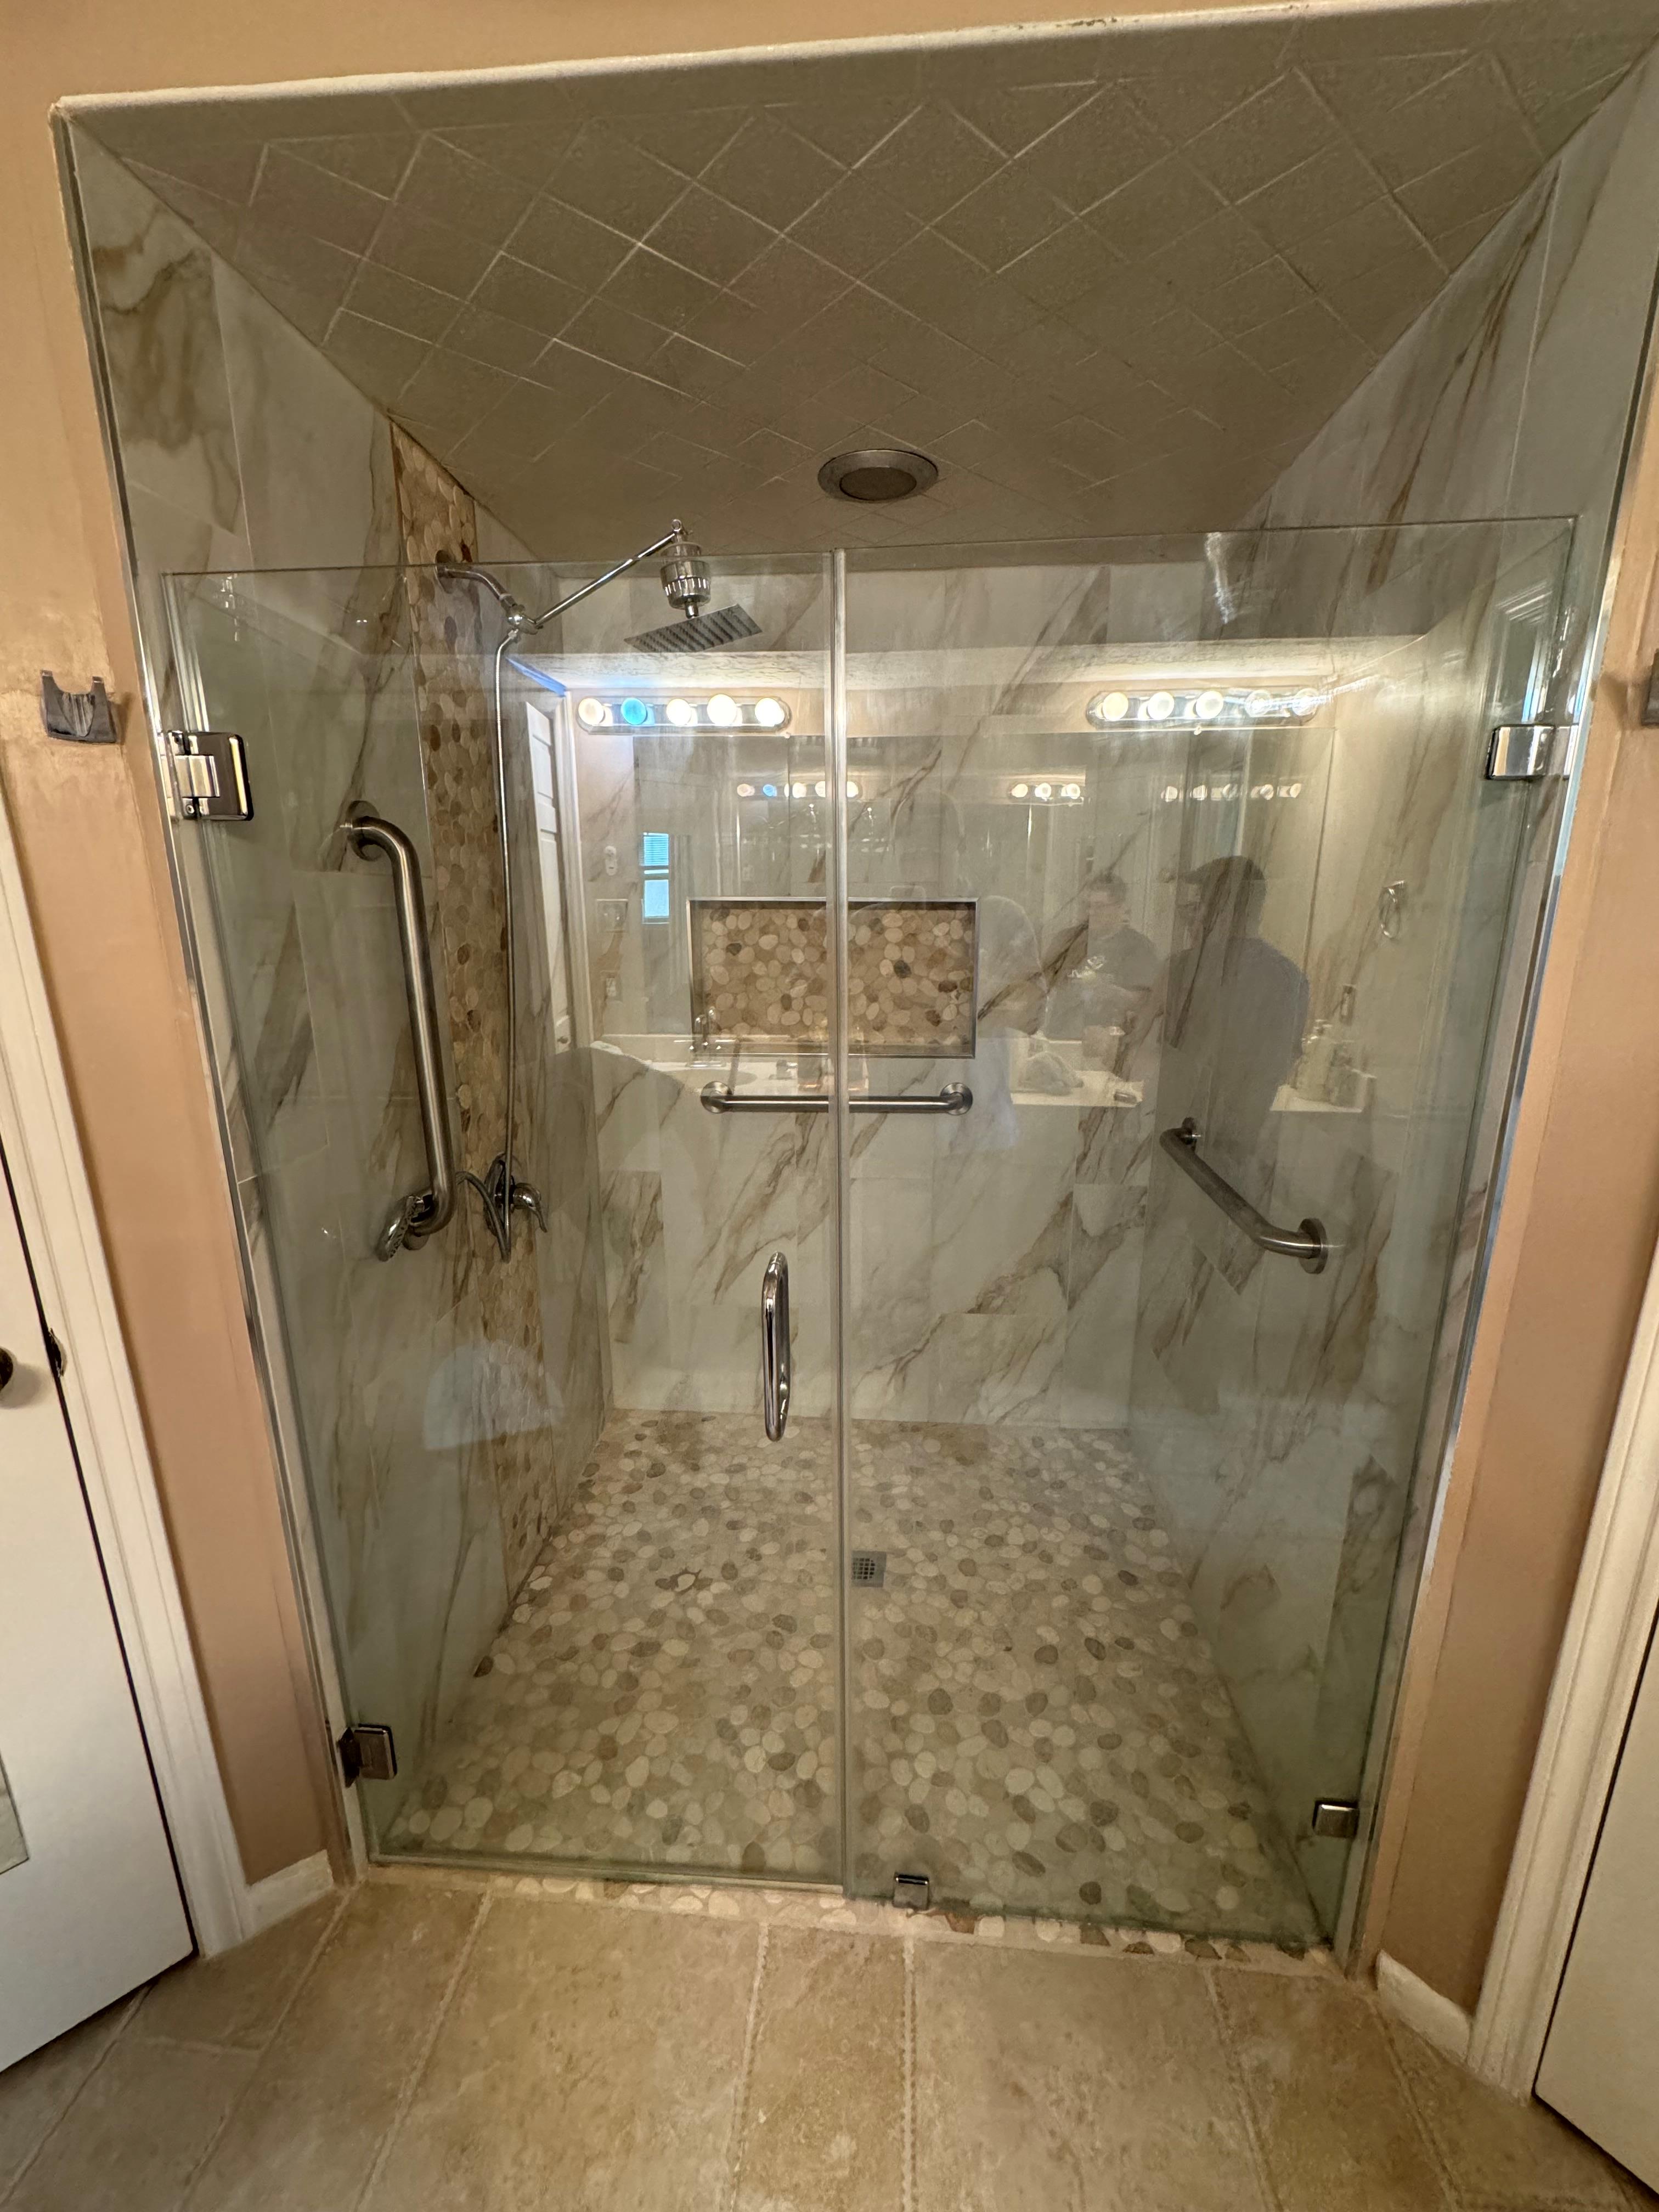 Finished tile bathroom with zero-entry shower